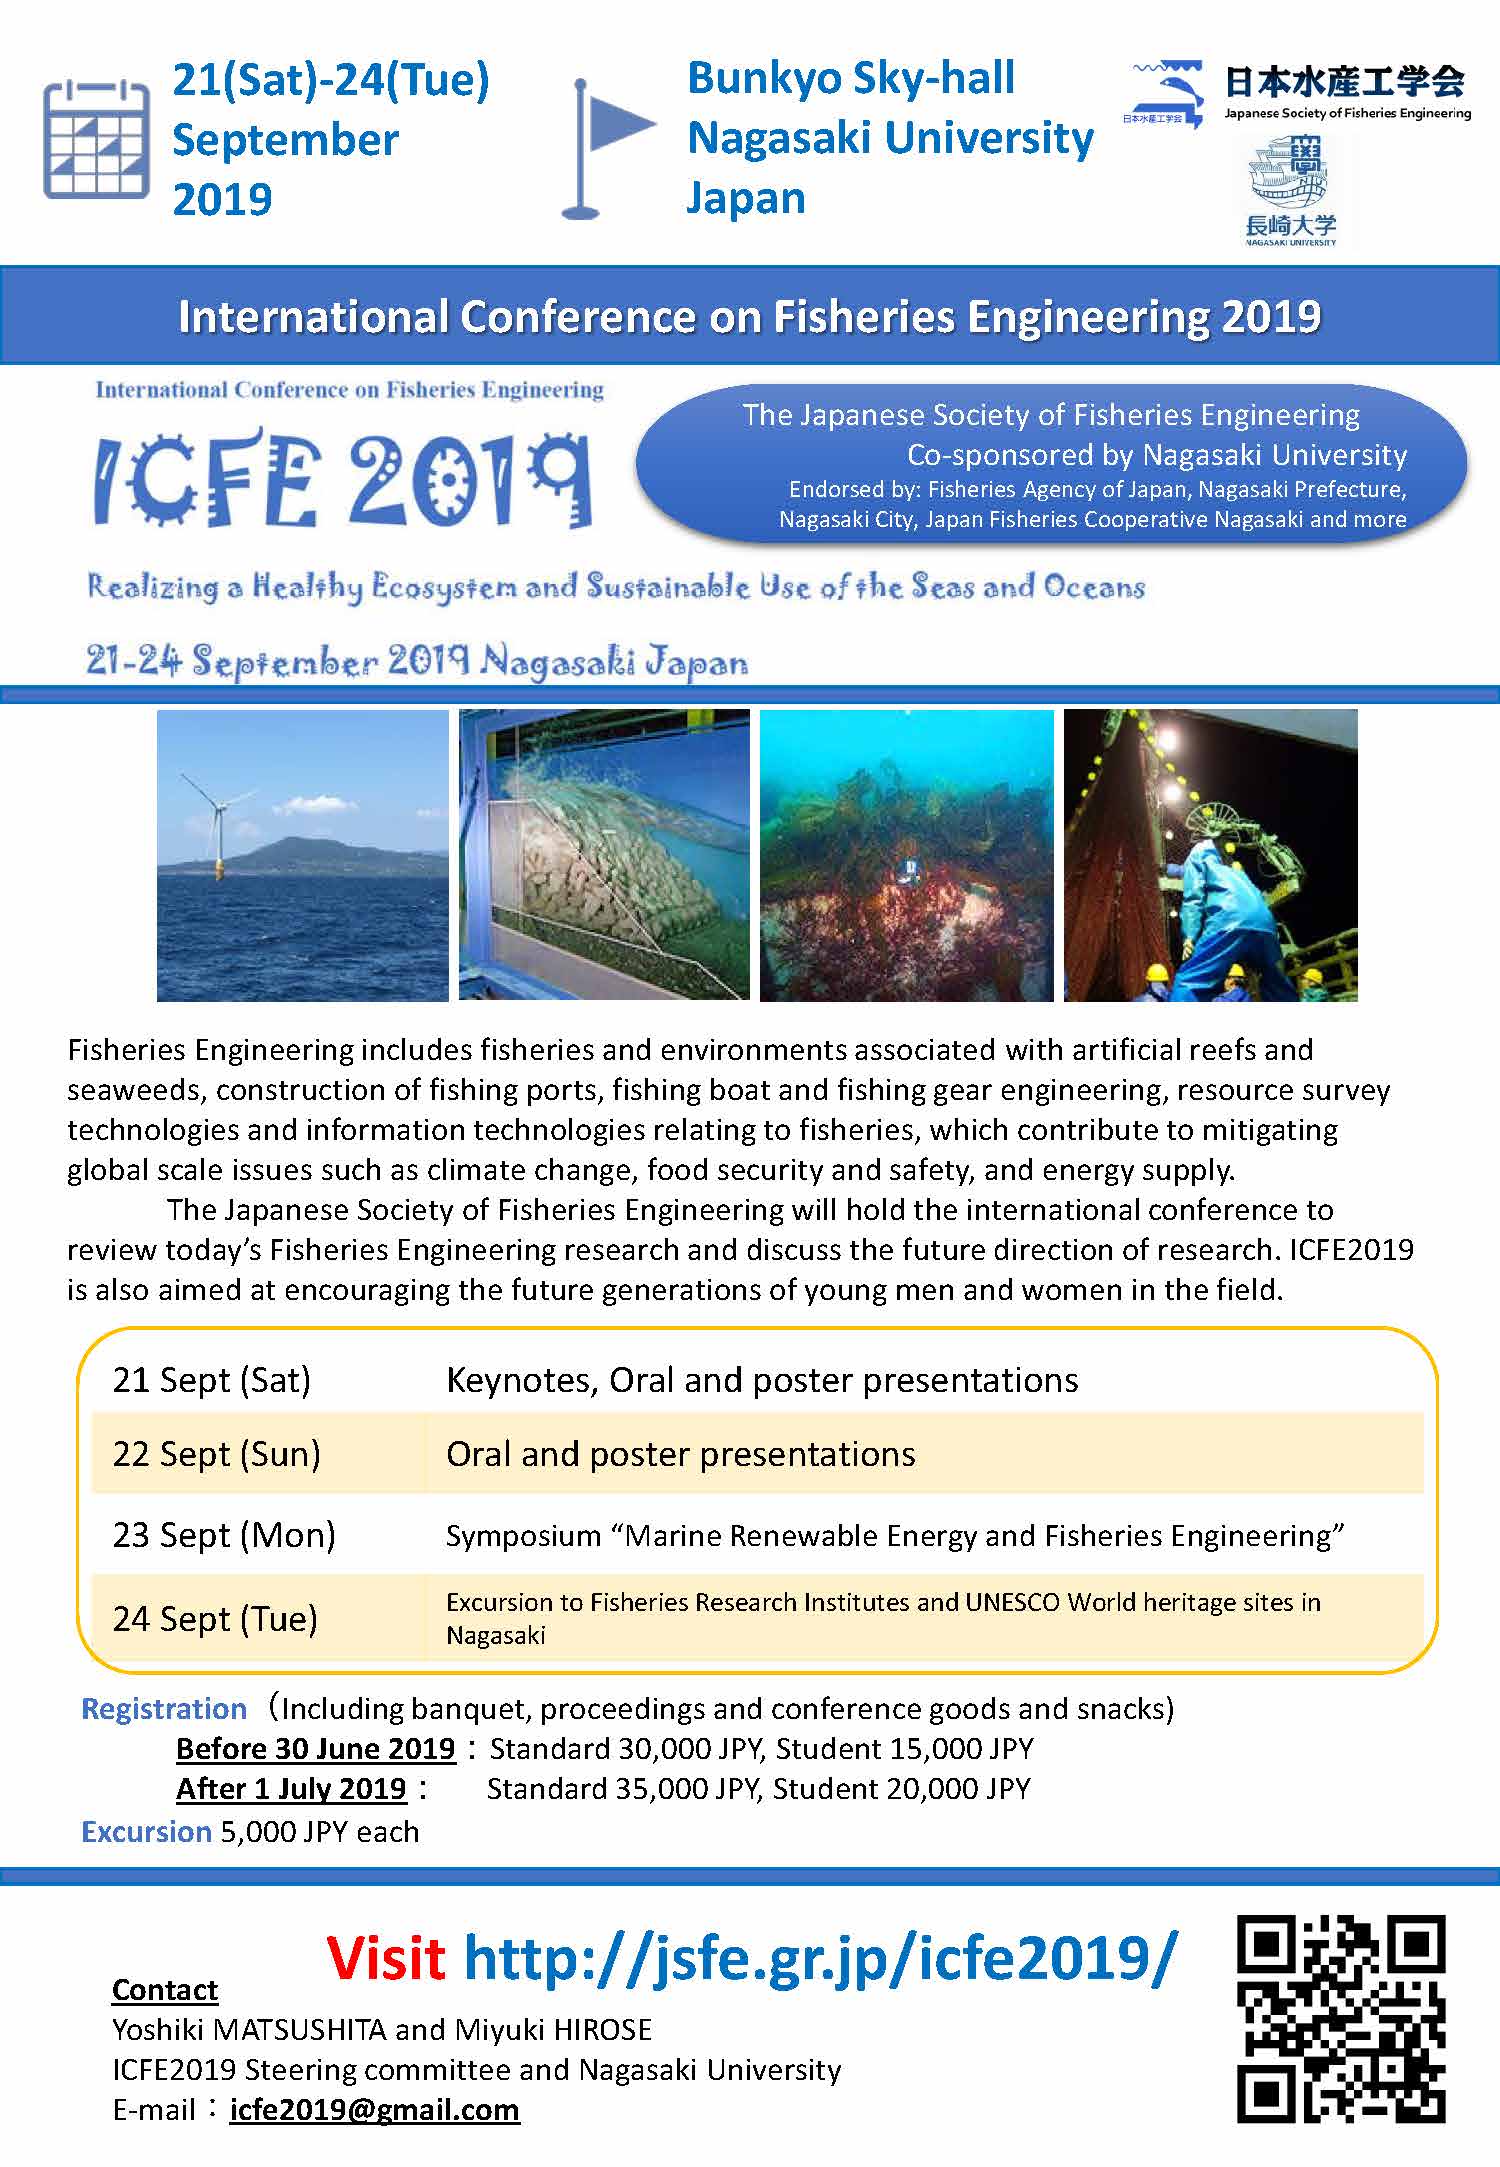 International Conference on Fisheries Engineering 2019